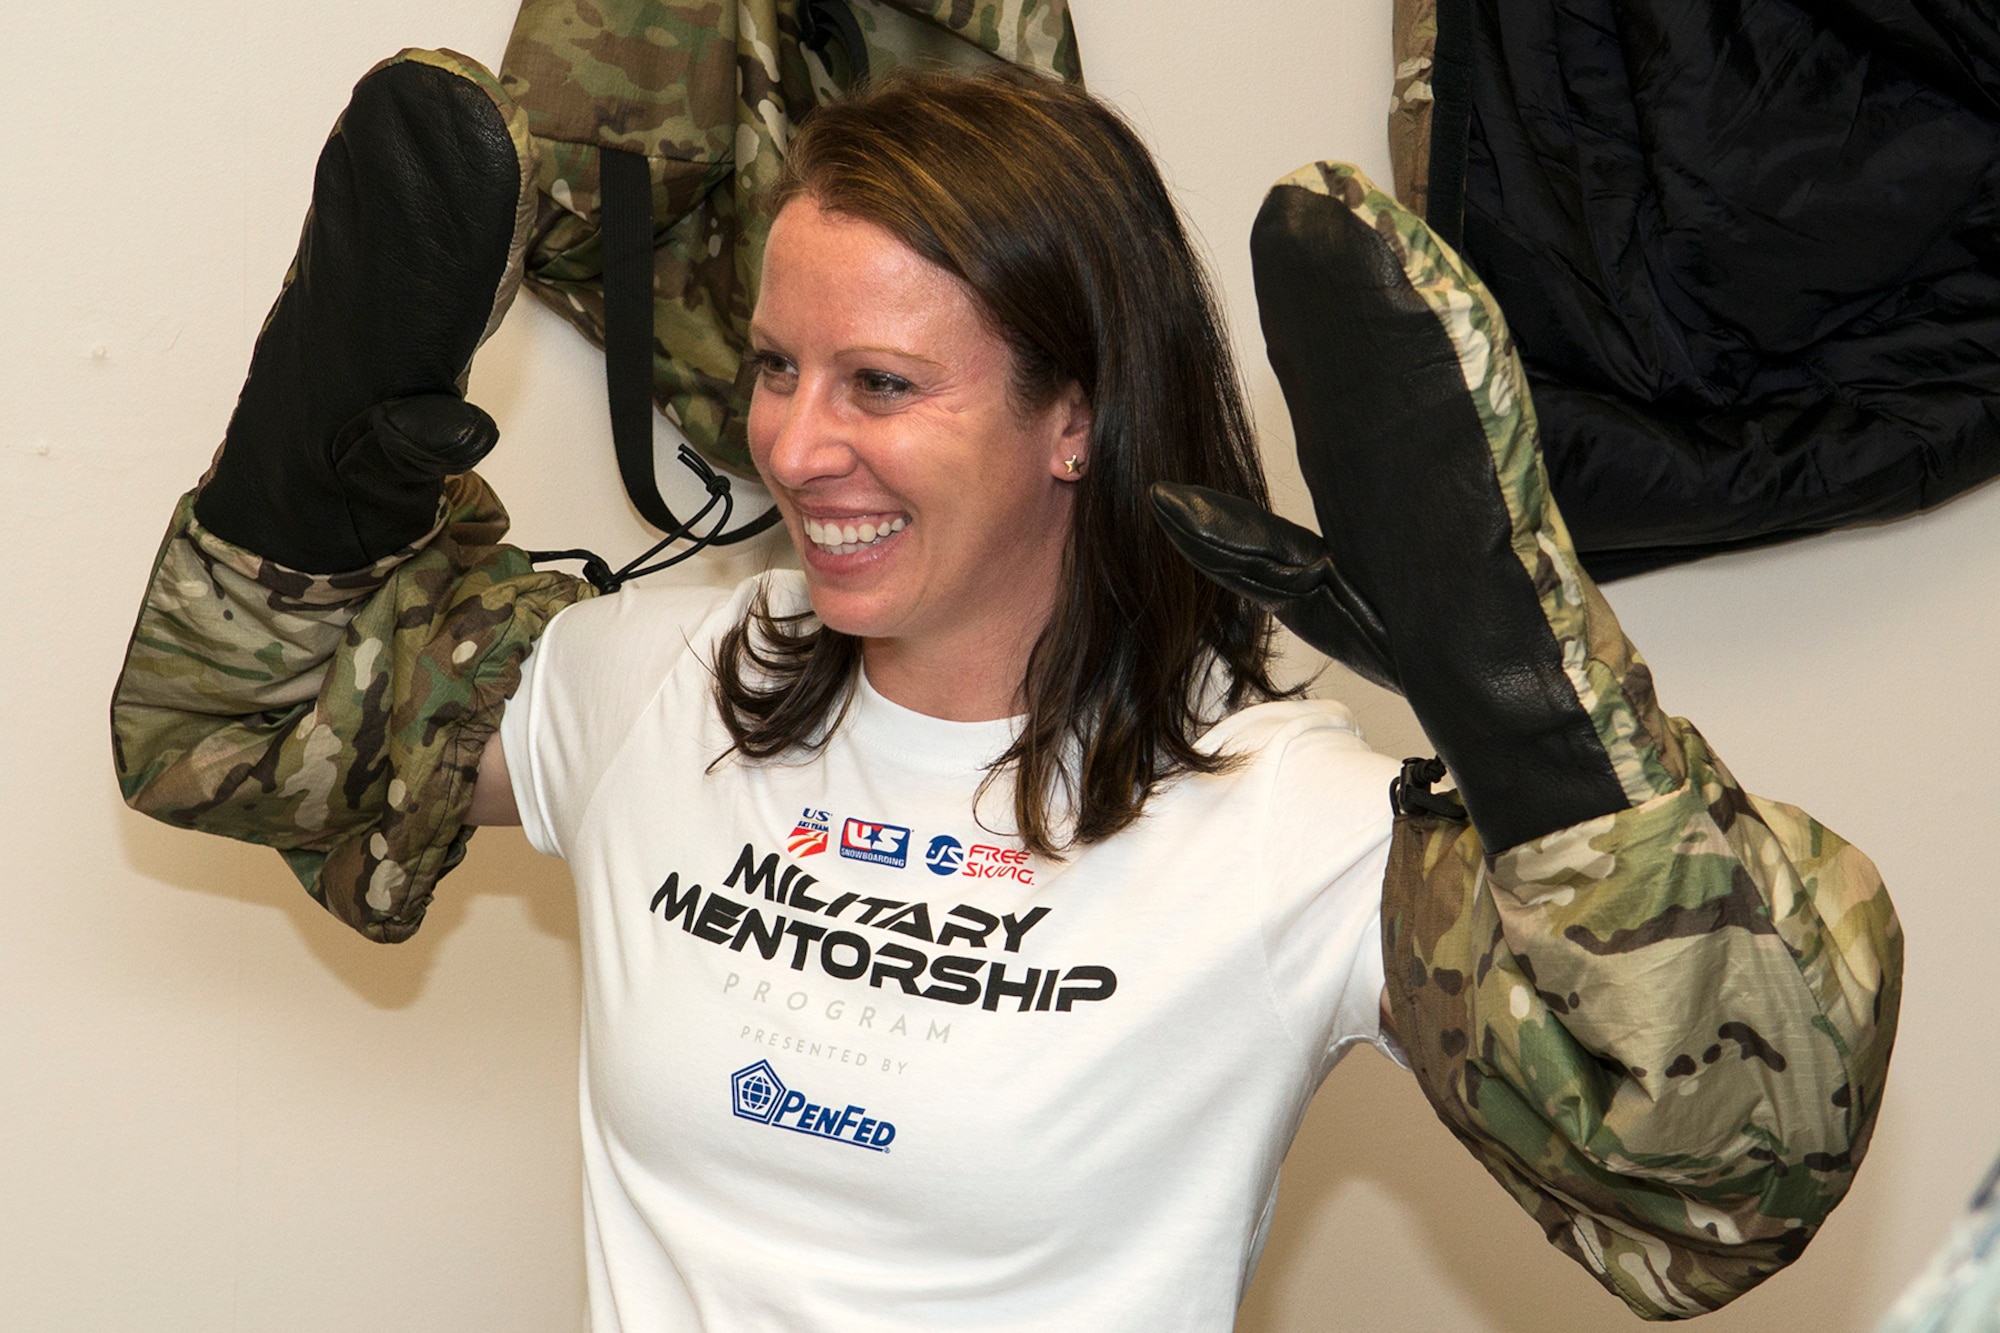 Emily Cook, 3-time Olympian U.S. Freestyle skier, tries on cold weather survival gear during a tour of the 307th Operations Support Flight aircrew flight equipment shot, June 4, 2014, Barksdale Air Force Base, La. Cook is part of the American300 Tours, which visits military installations with the goal of increasing resiliency of the troops, their families, and the communities that they live and operate in. (U.S. Air Force photo by Master Sgt. Greg Steele/Released)